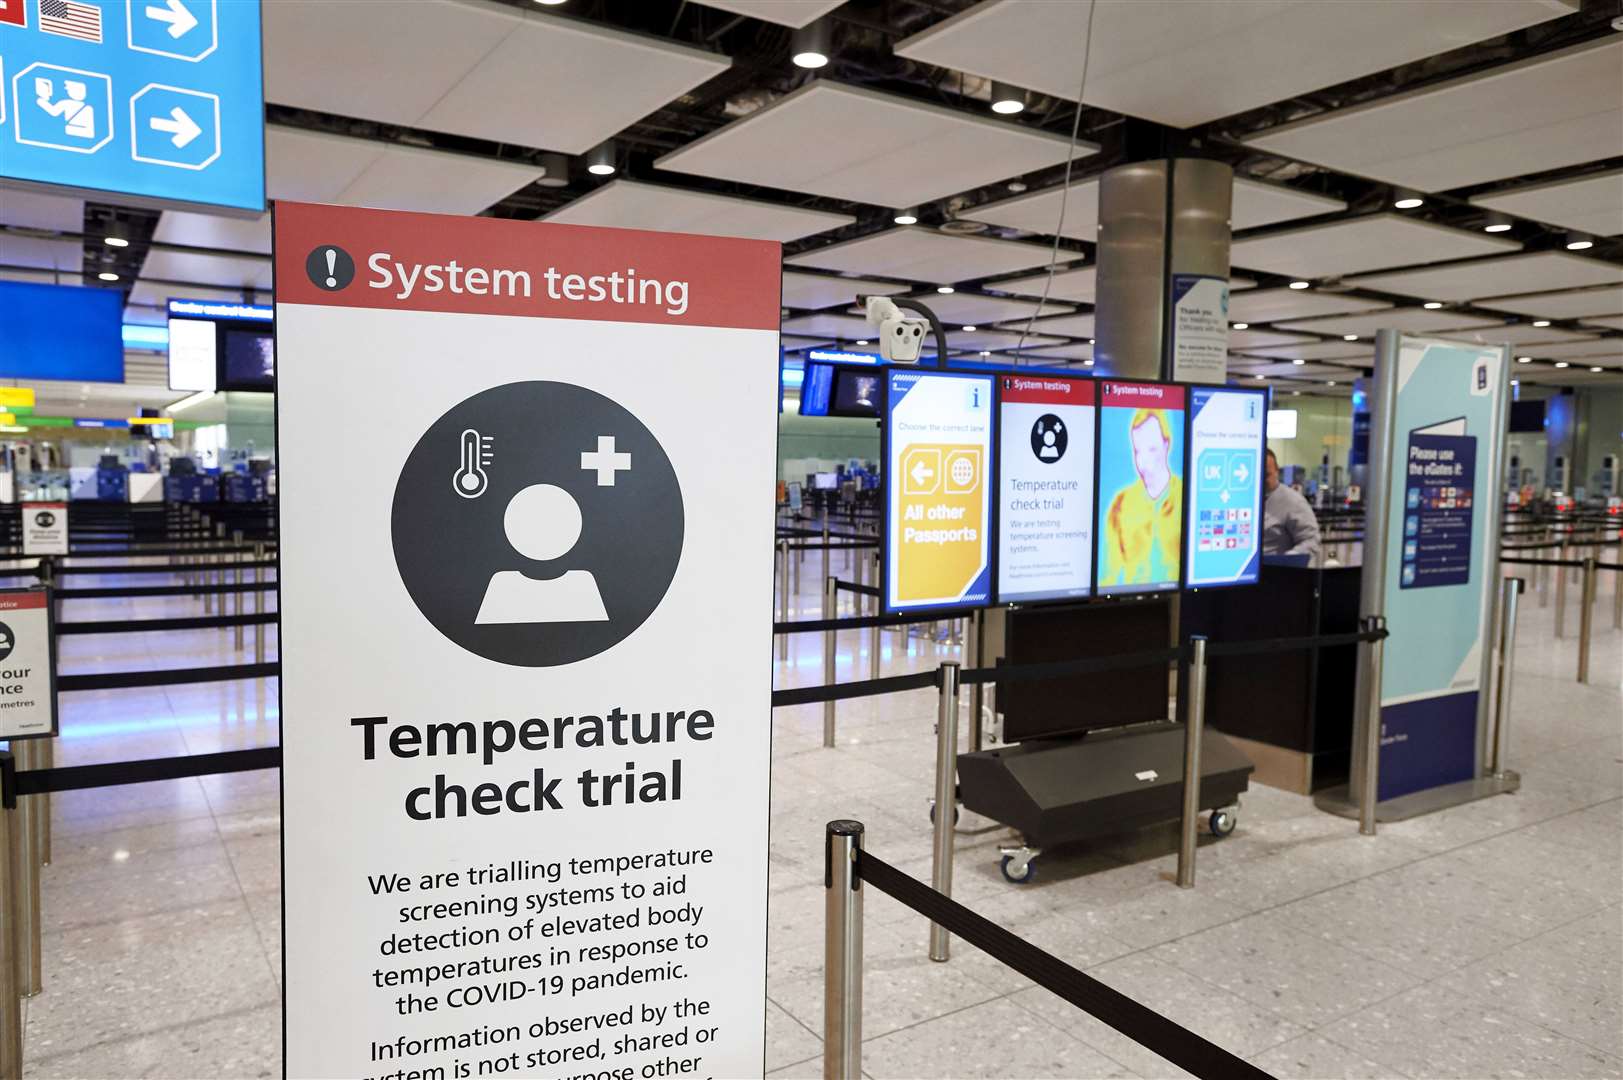 New signage alerts passengers to the trial (LHR Airports Limited/PA)